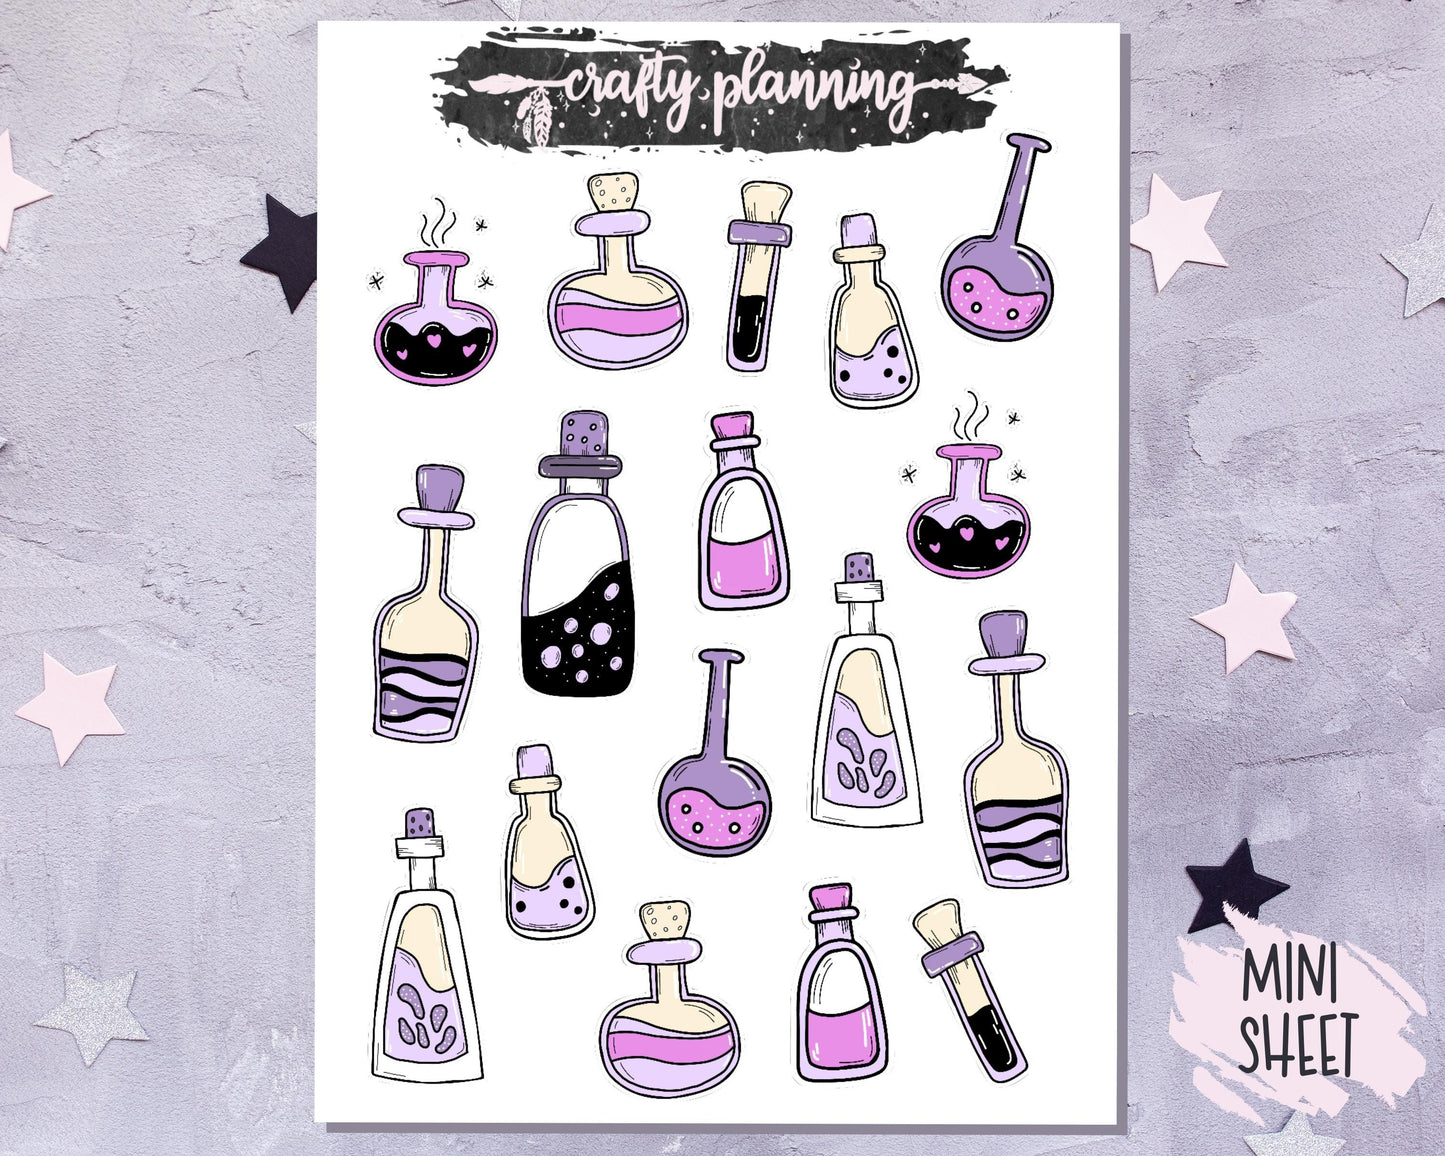 Potion Bottle Stickers, Witchcraft Stickers, Witchy Stickers, Pagan Stickers, Wicca Stickers, Book Of Shadows, Planner Stickers